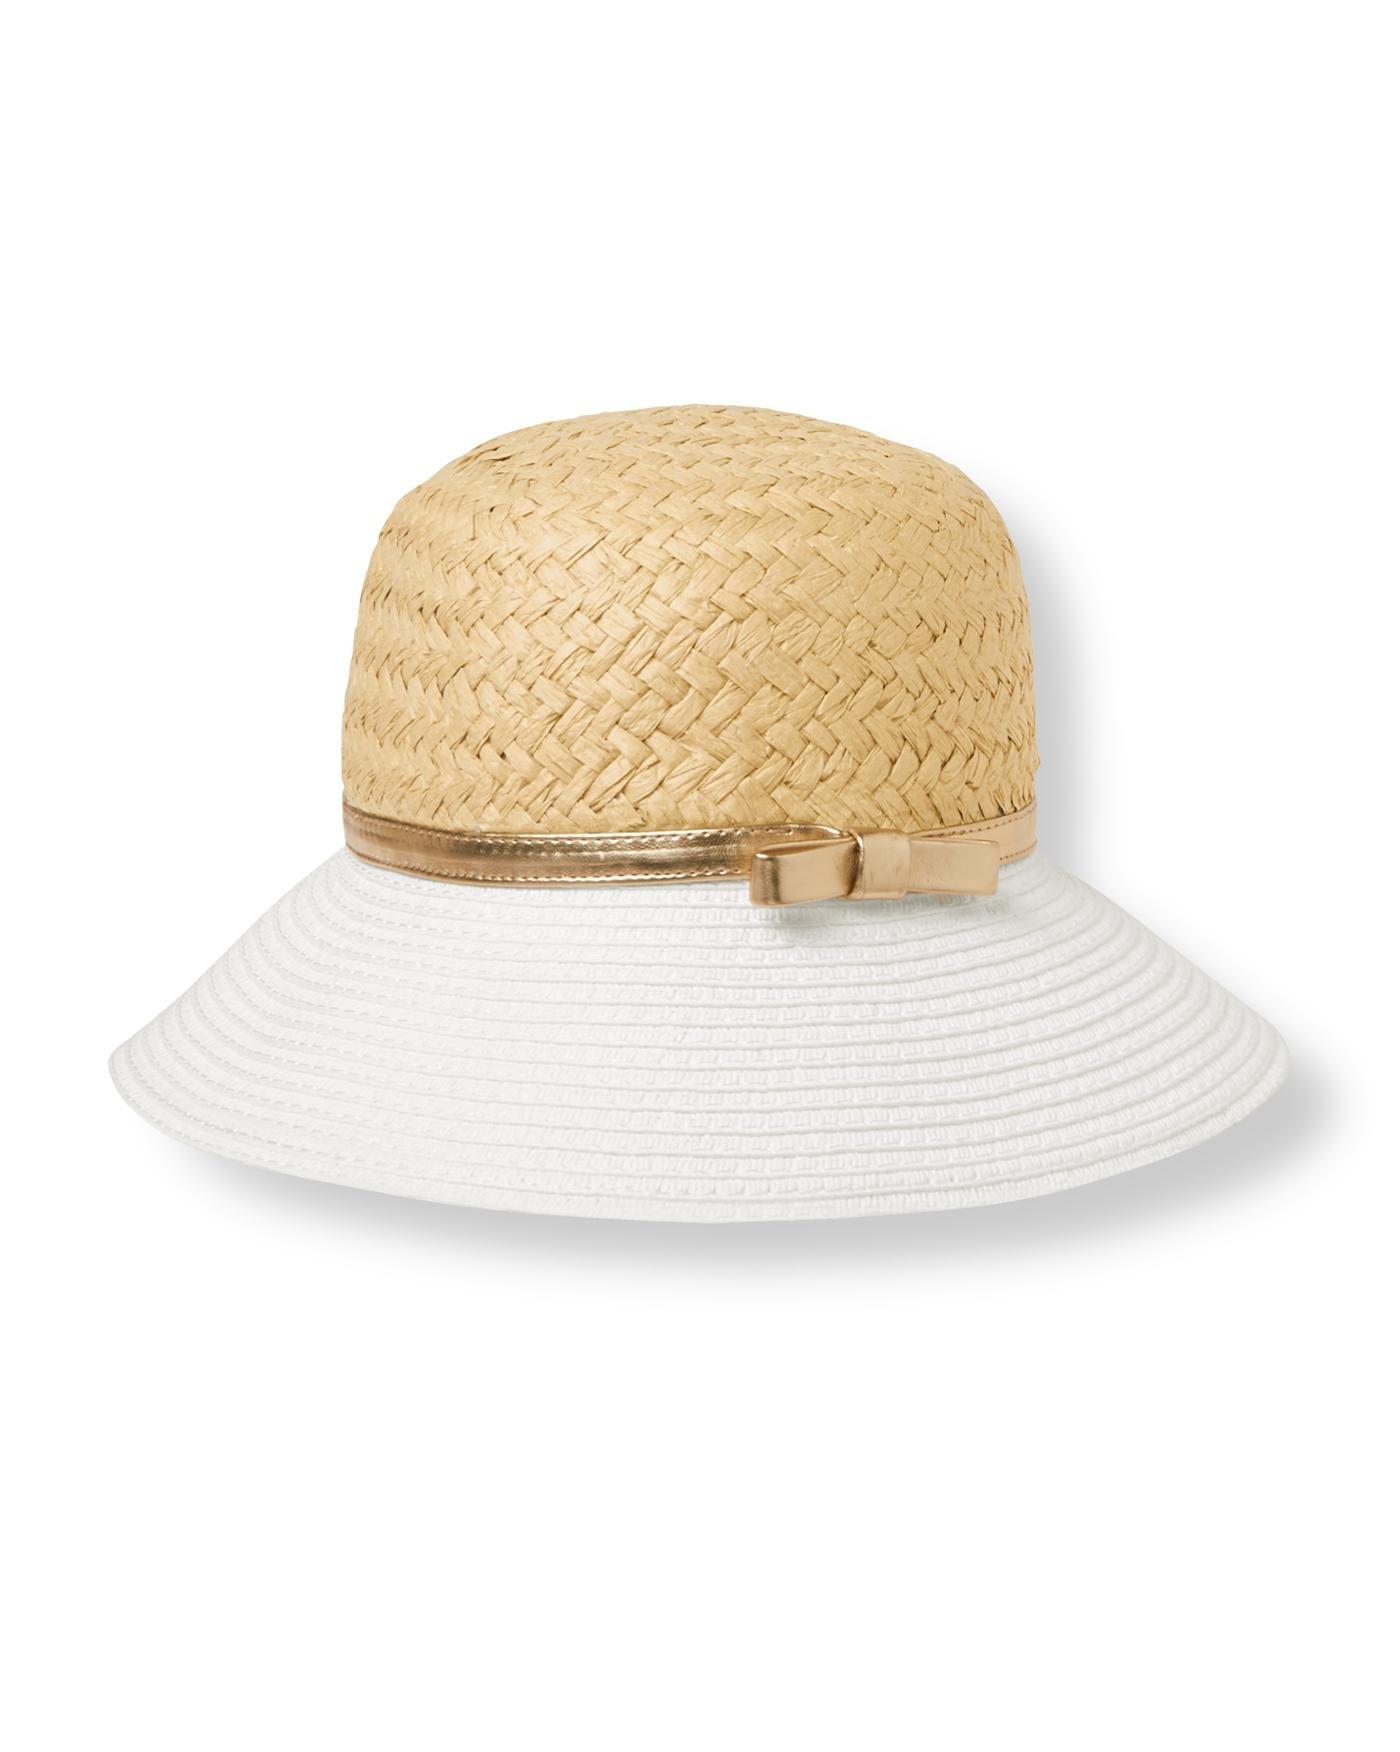 Colorblock Straw Sunhat image number 0